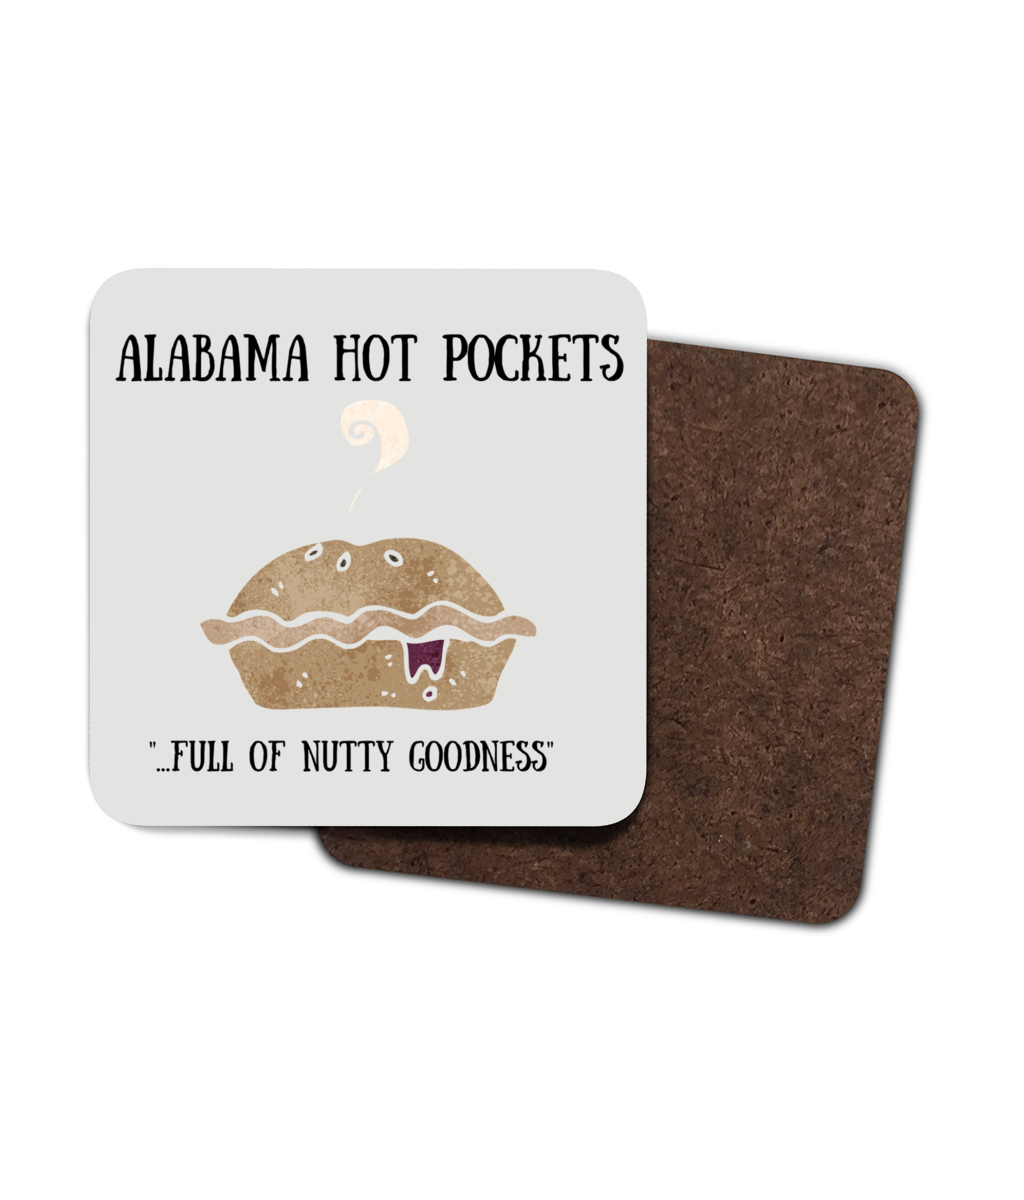 dimitri constantinides recommends what is an alabama hot pocket pic